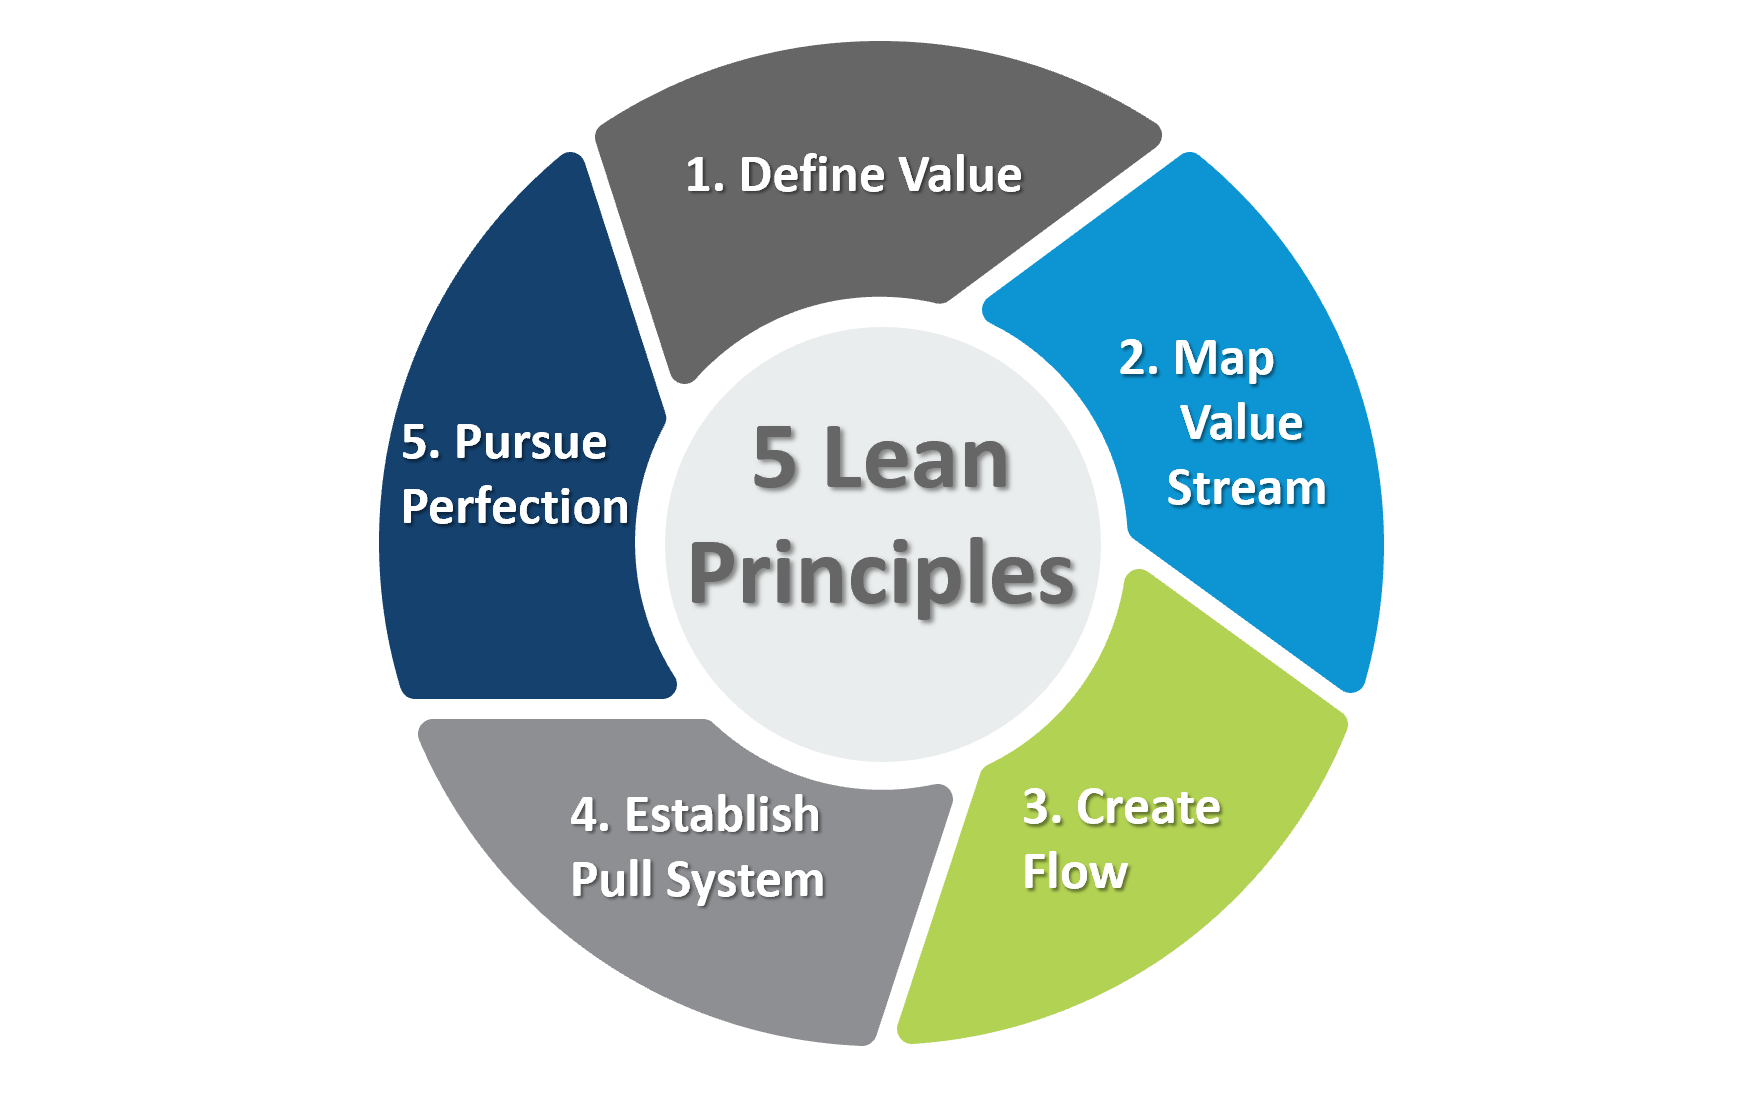 What are the 5 principles of Lean production?